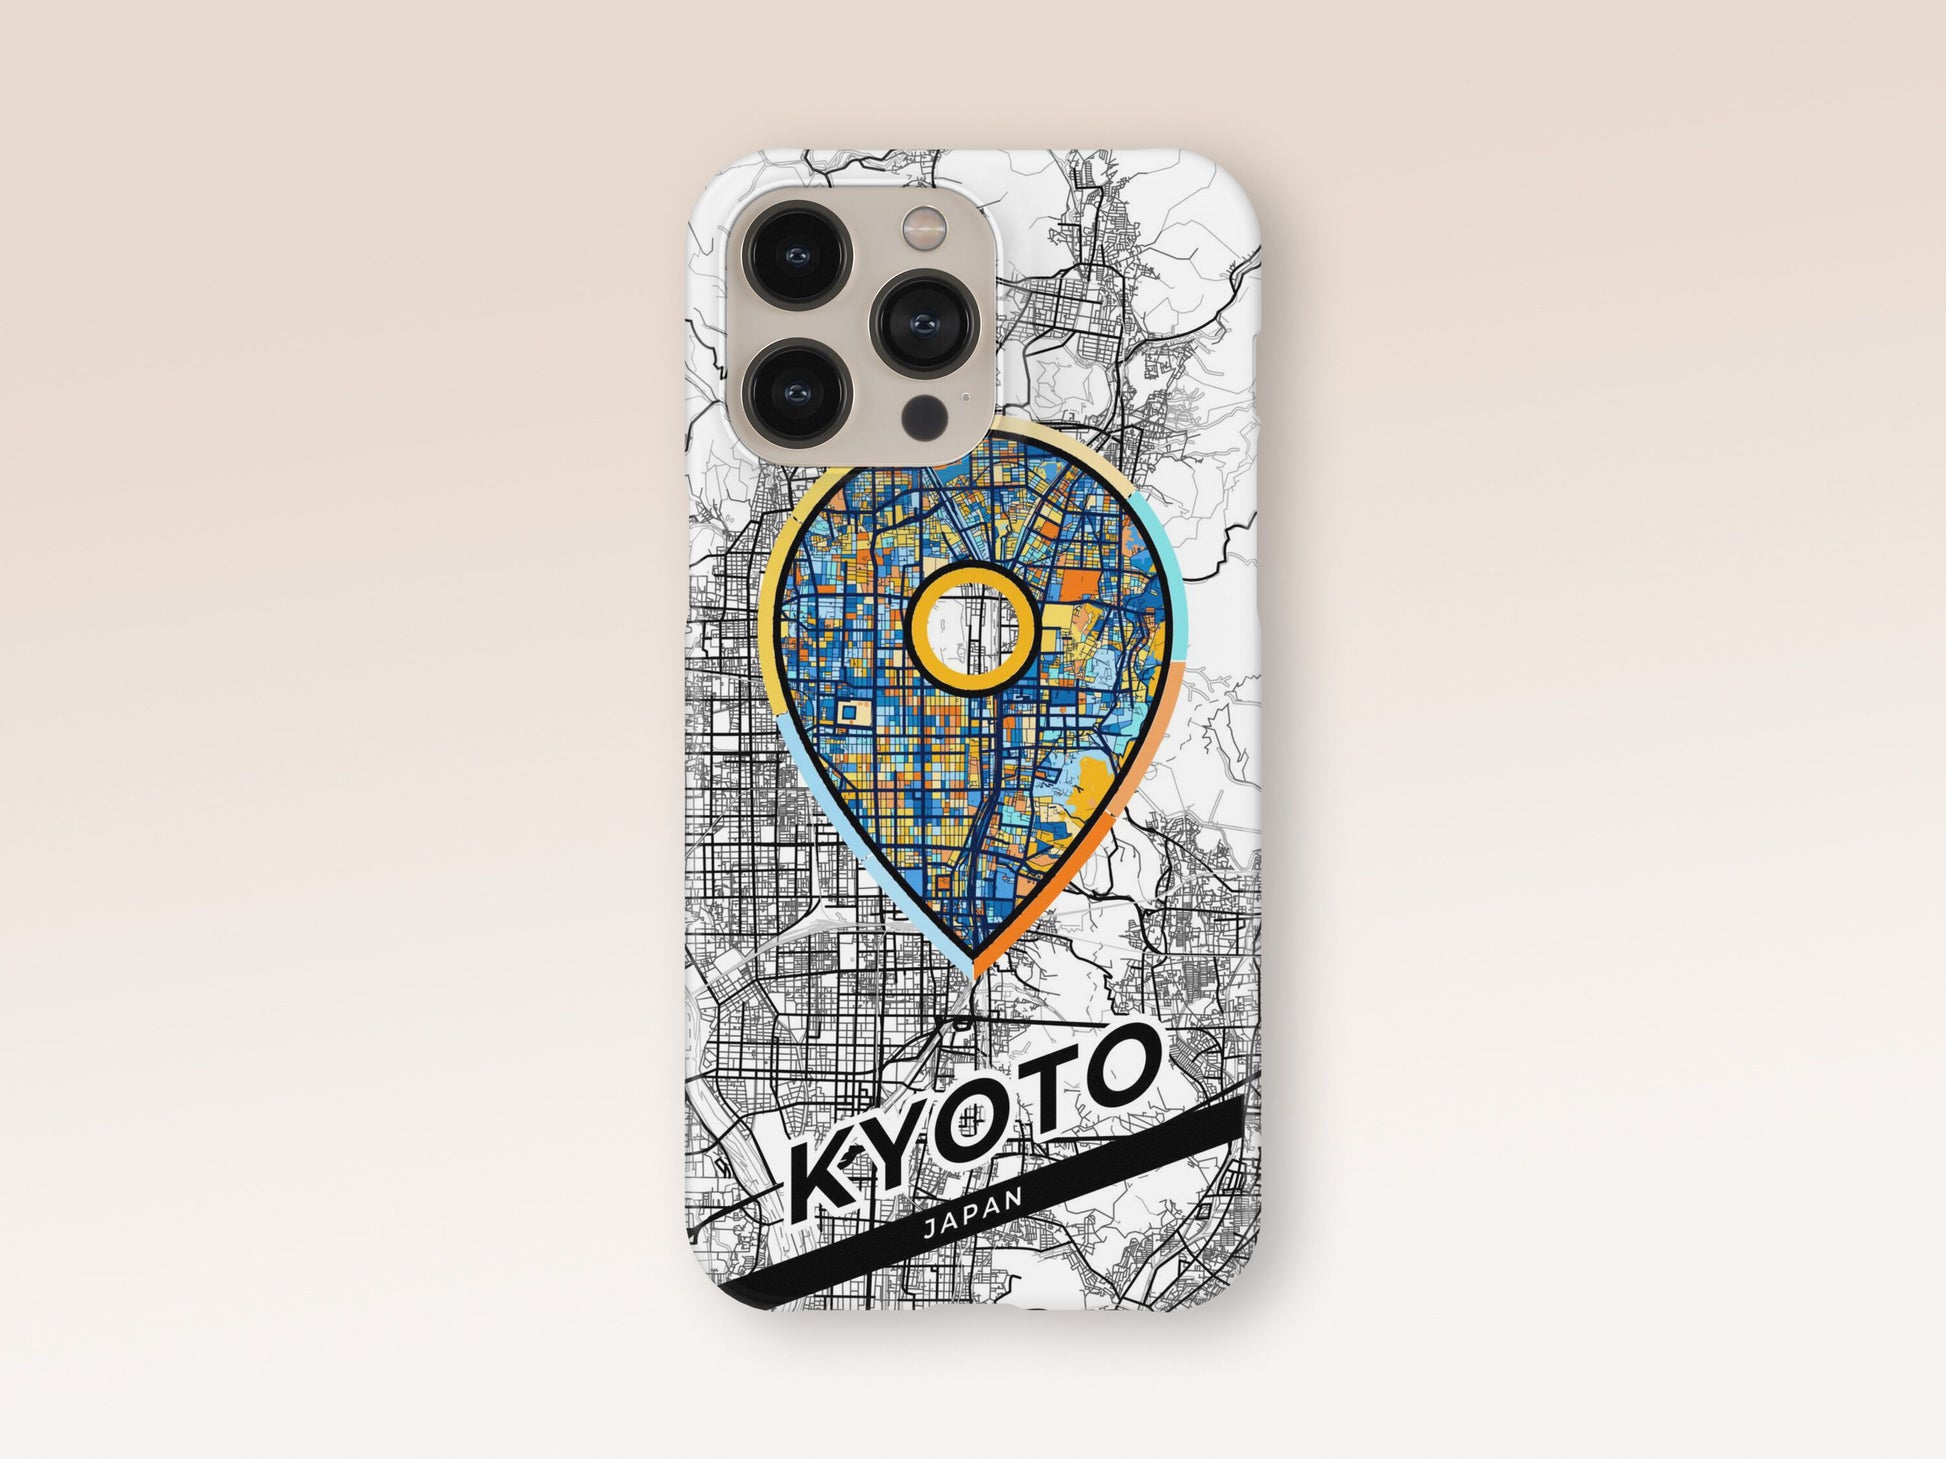 Kyoto Japan slim phone case with colorful icon. Birthday, wedding or housewarming gift. Couple match cases. 1